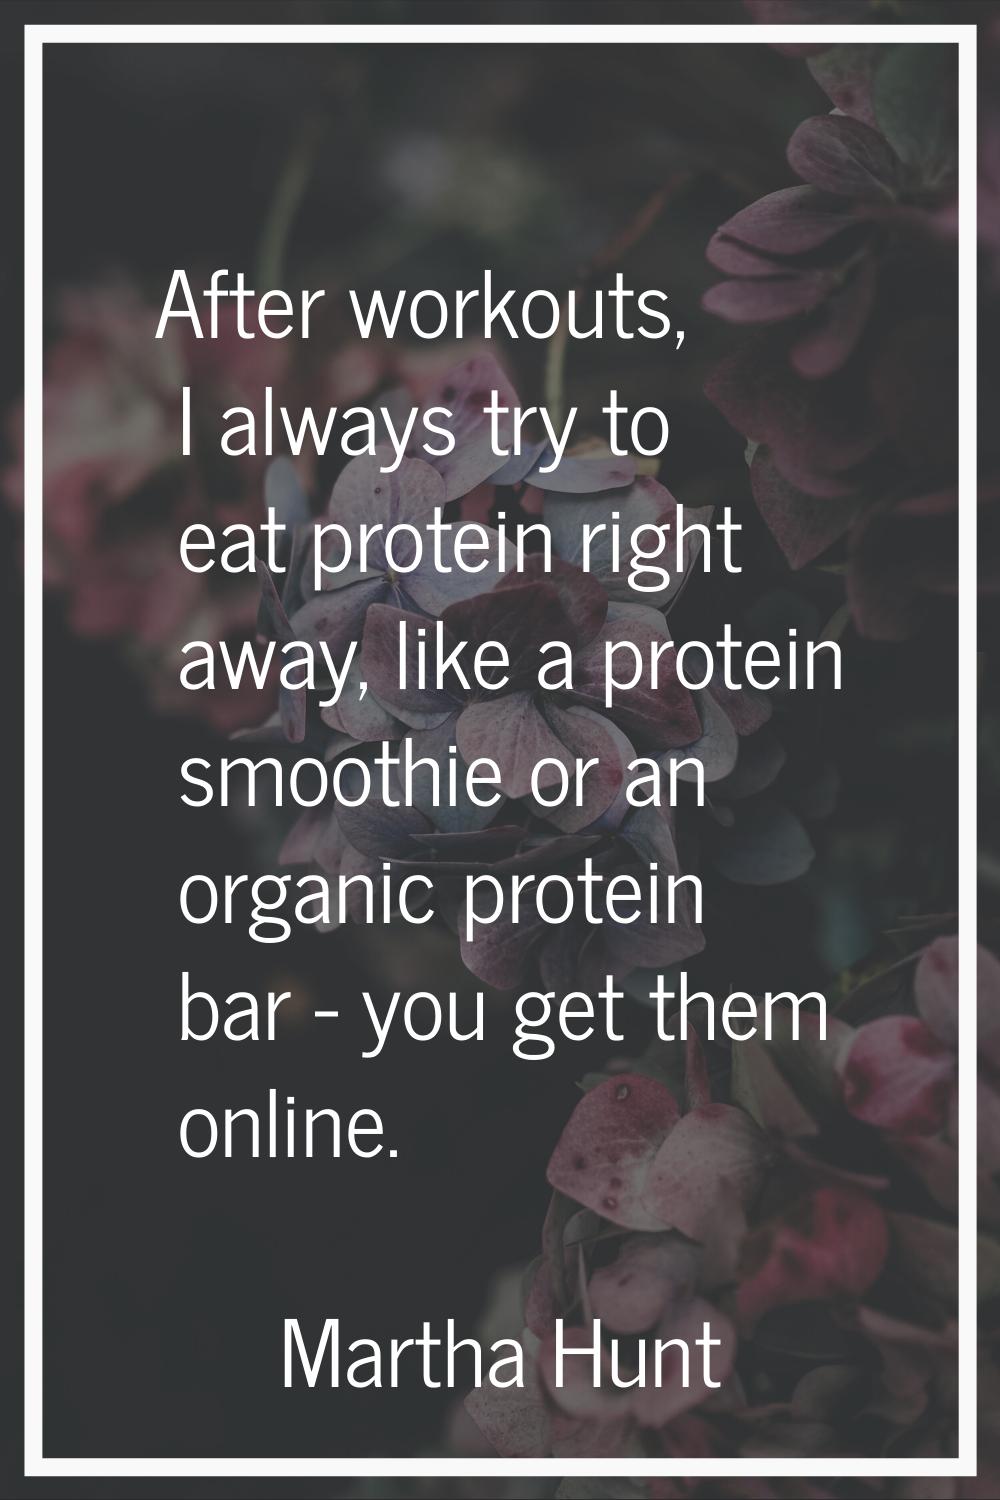 After workouts, I always try to eat protein right away, like a protein smoothie or an organic prote